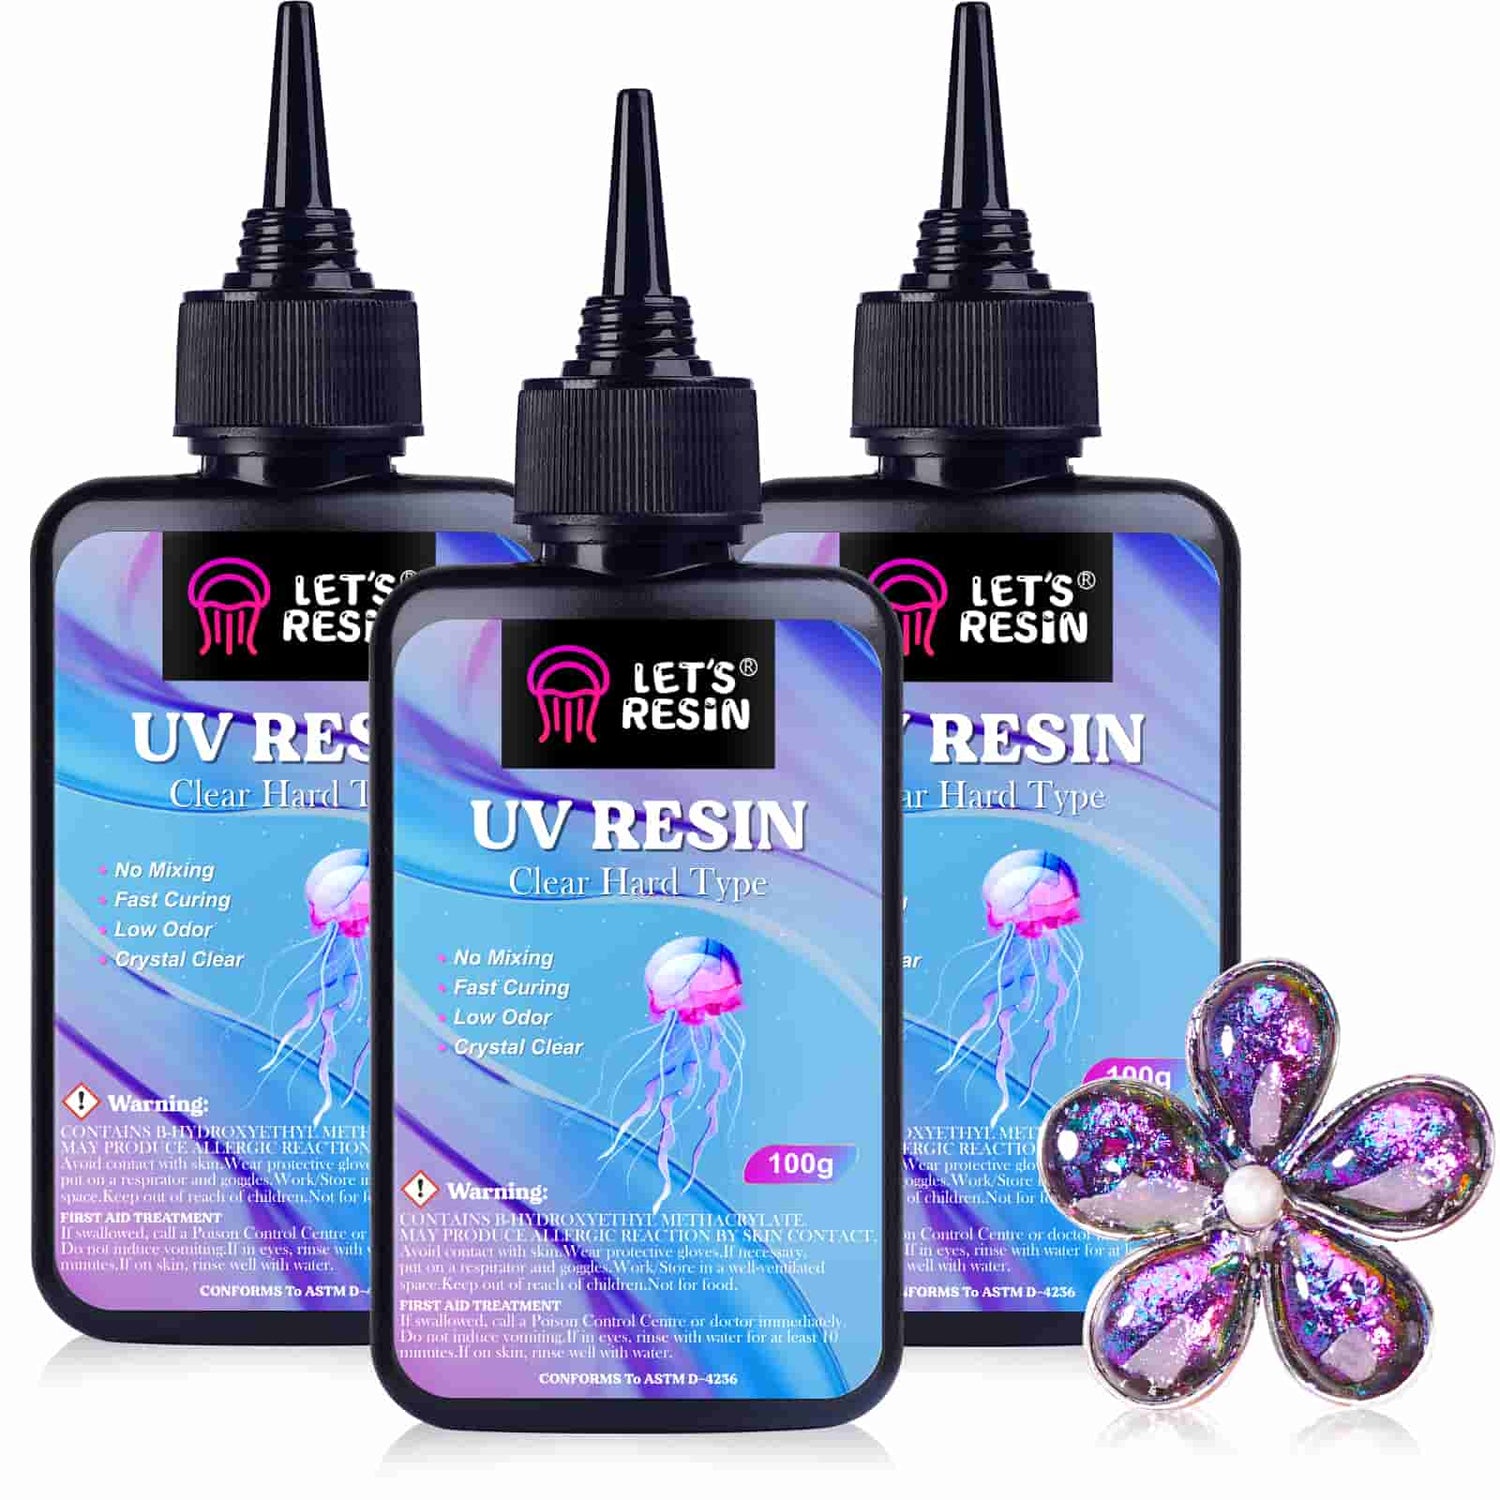 UV Resin Clear, 200g Upgraded UV Epoxy Resin Glue Hard Type Ultraviolet  Fast Curing with UV Light, Solar Cure Sunlight Activated Resin for Jewelry